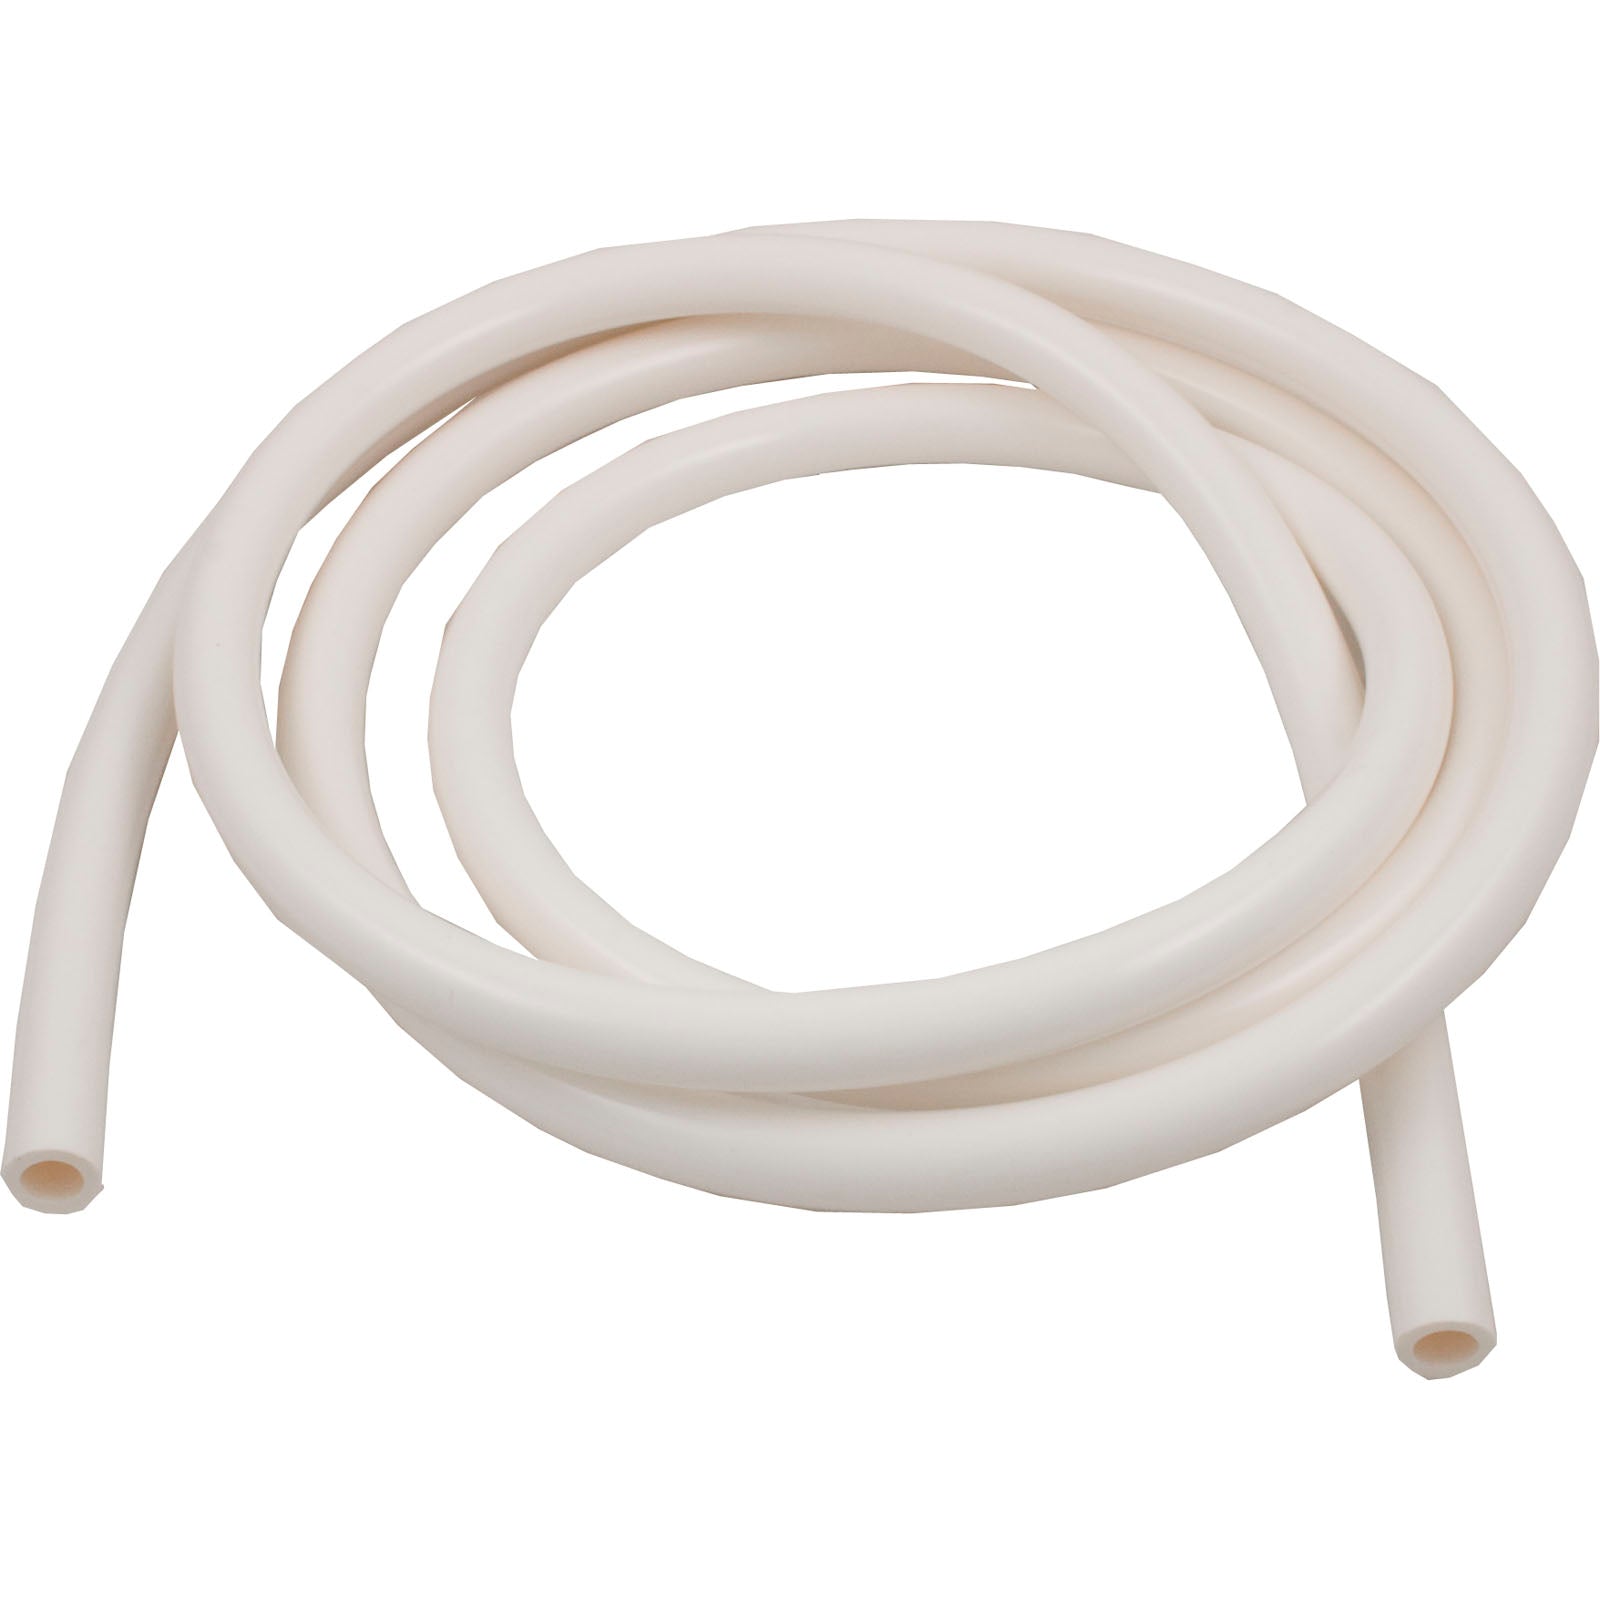 Feed Hose, Pentair Letro 3-Wheel Cleaner, 10 foot, White- LD45